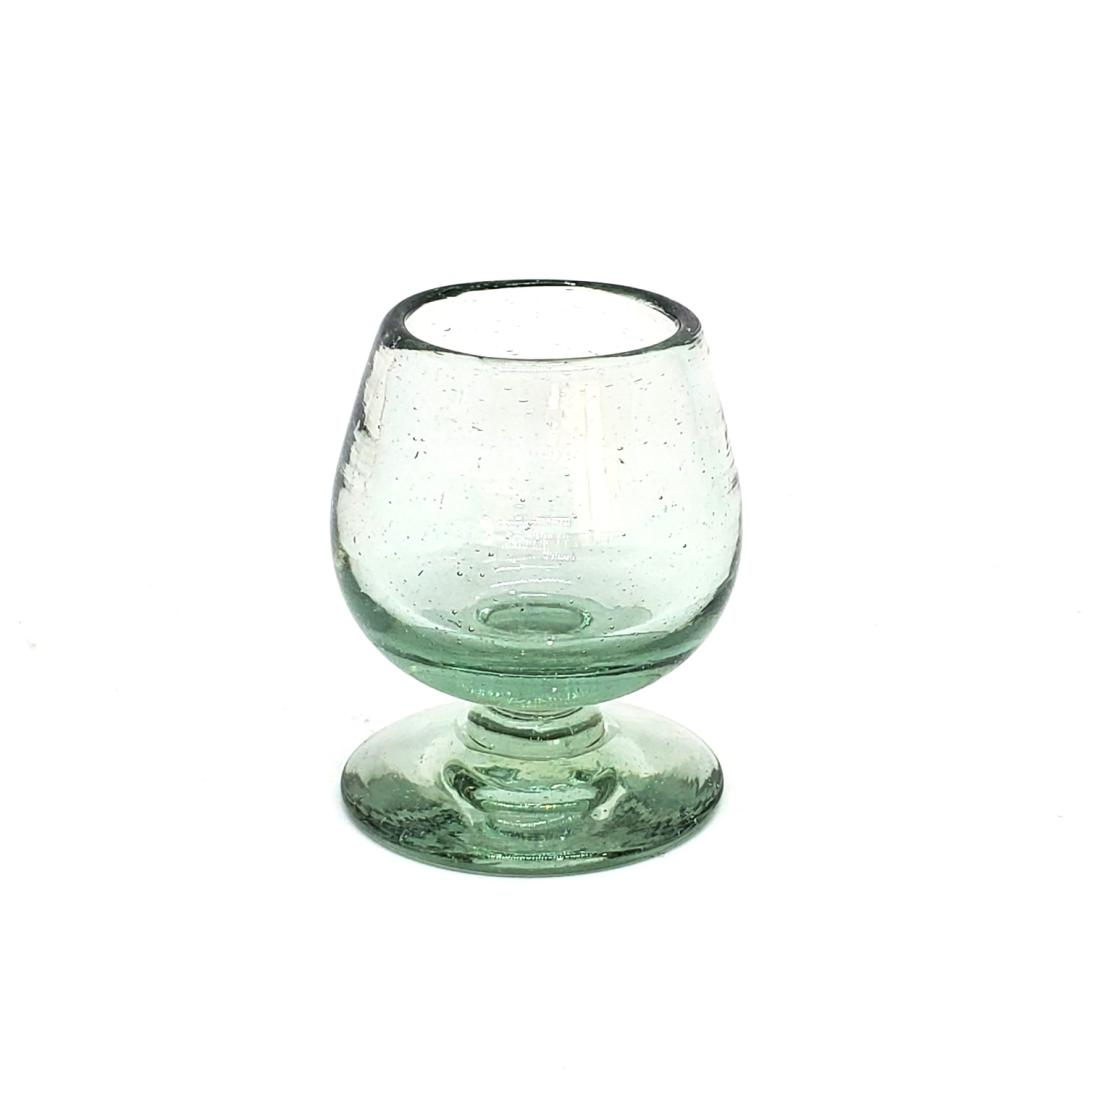 Tequila Shot Glasses / Clear 2.5 oz Tequila Sippers  (set of 6) / Sip your favourite tequila or mezcal with these iconic clear handcrafted sipping glasses. You may also serve lemon juice or other chasers.